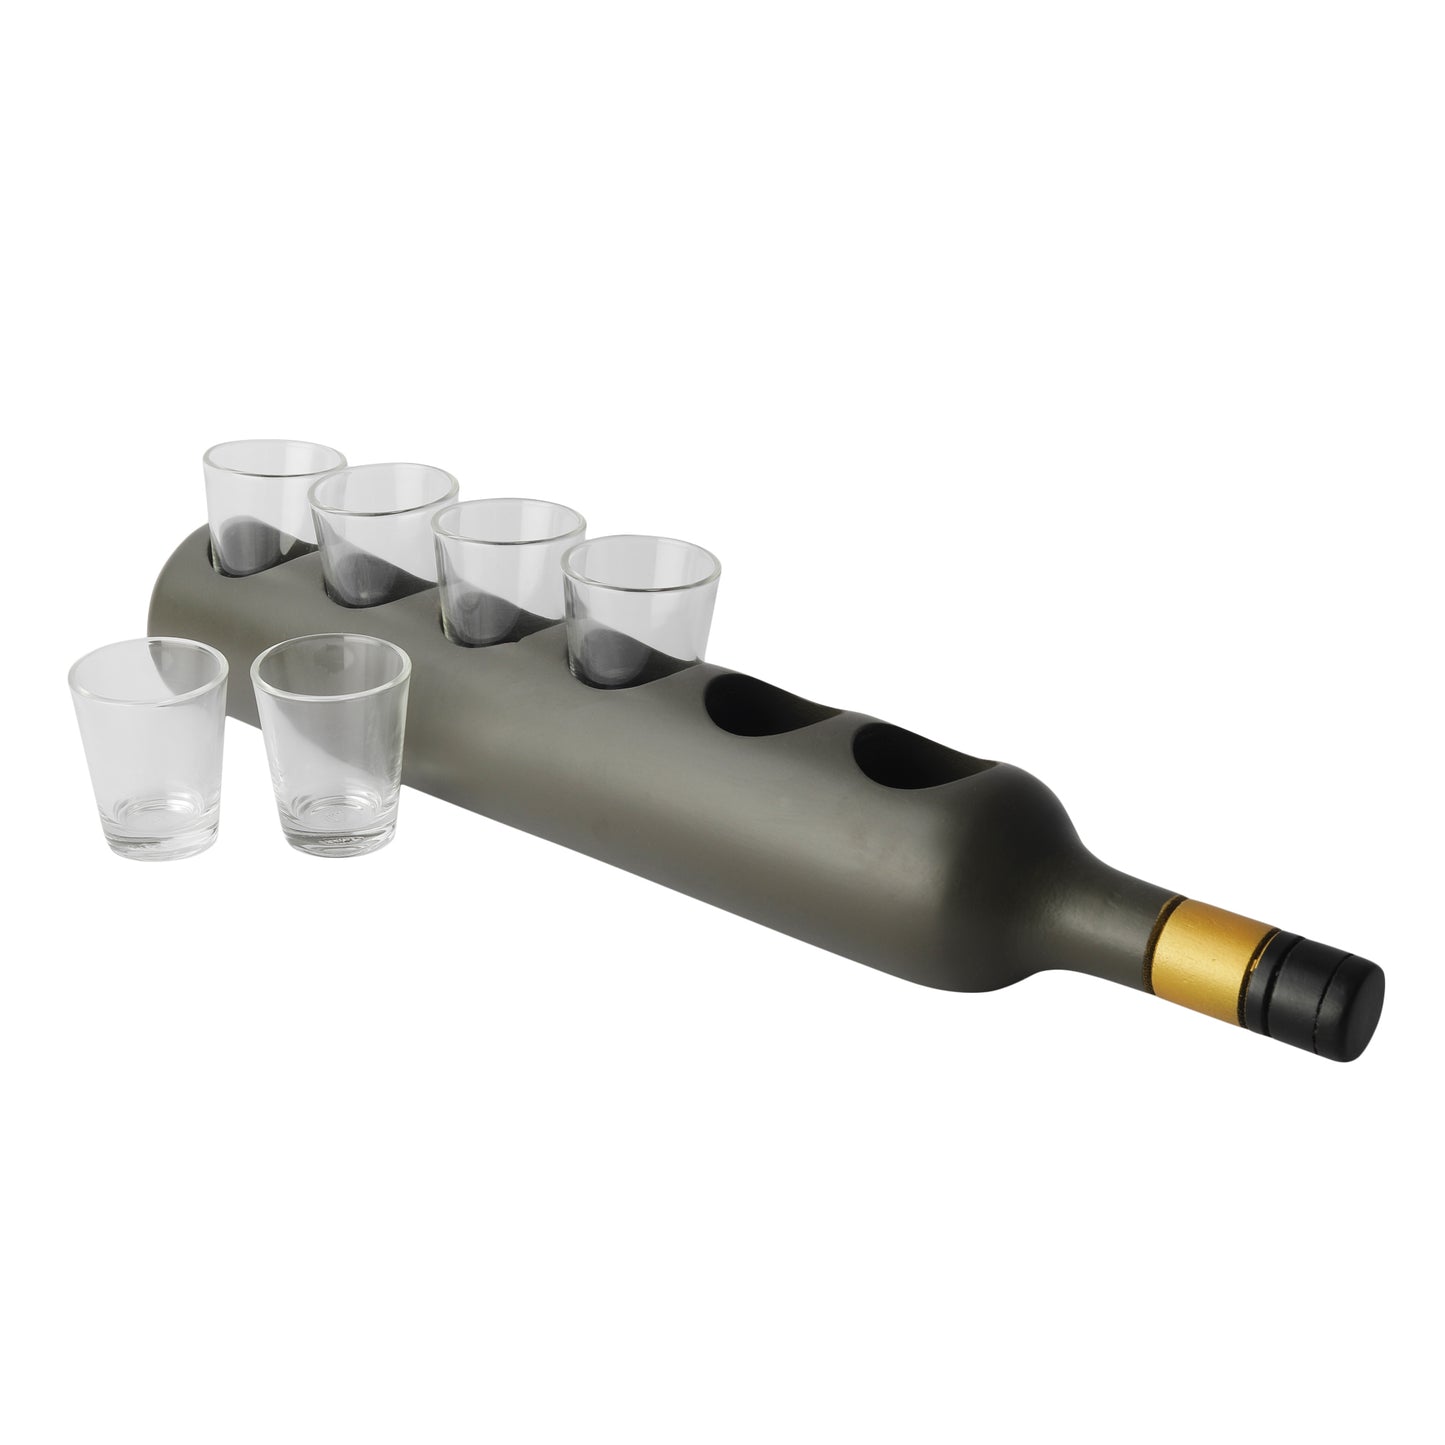 Bottle Shot Glass Tray with 6 Glasses